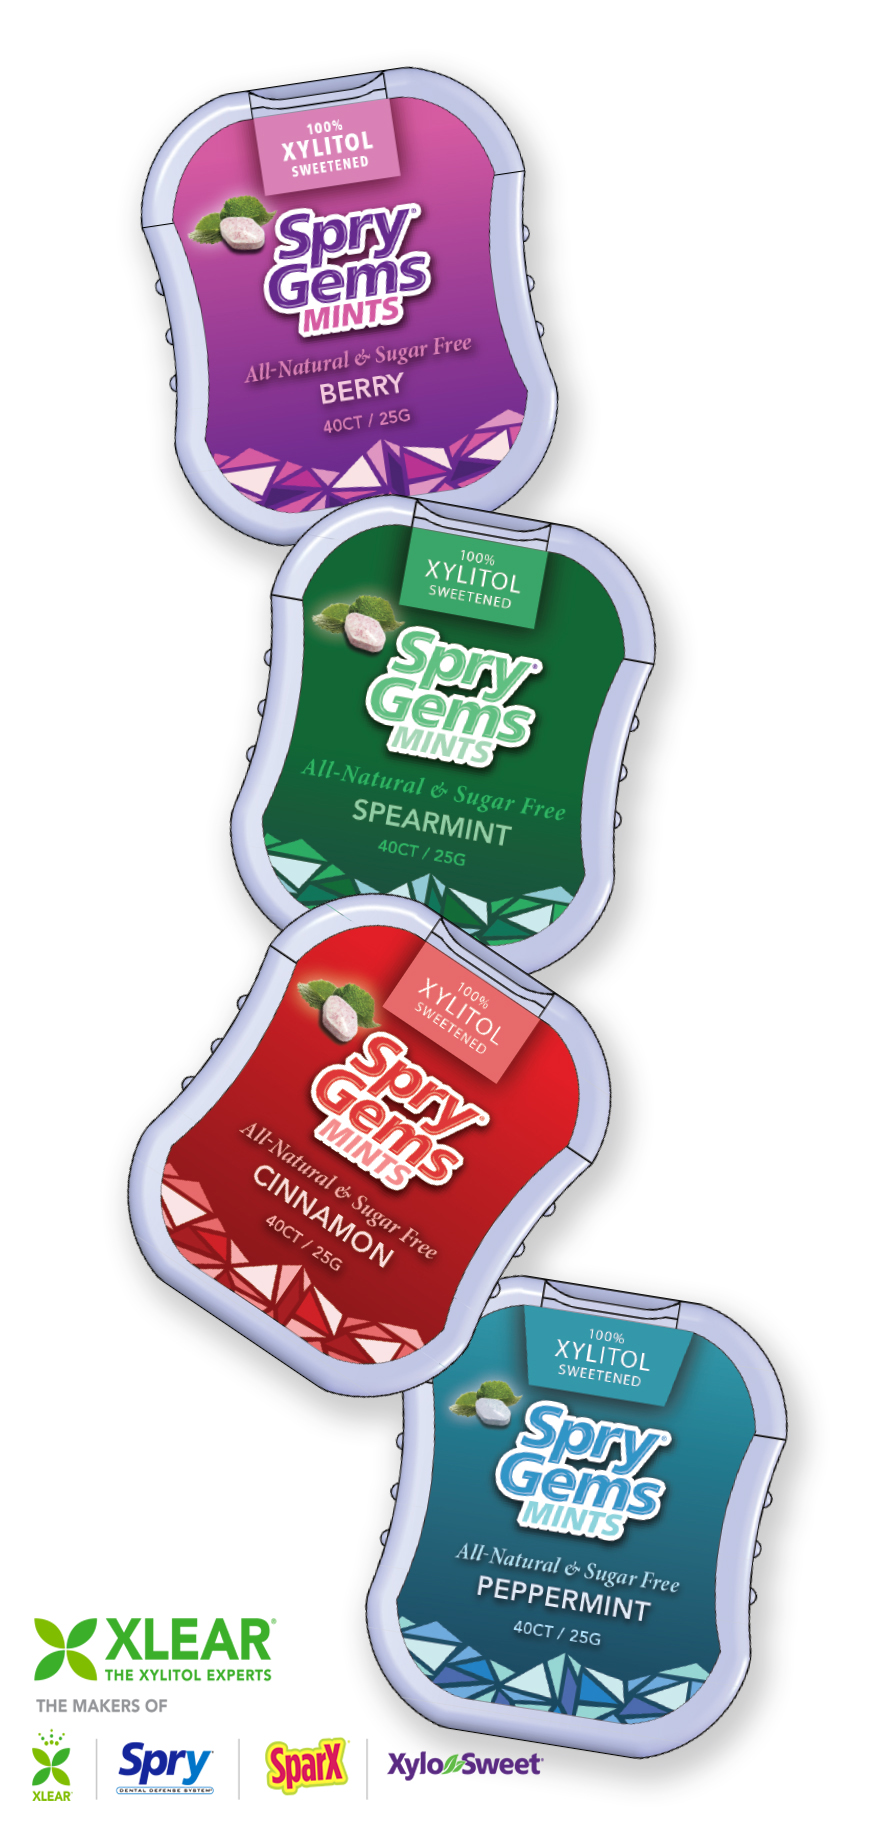 All four new flavors of Xlear's Spry Gems, the latest addition to the Spry Dental Defense System